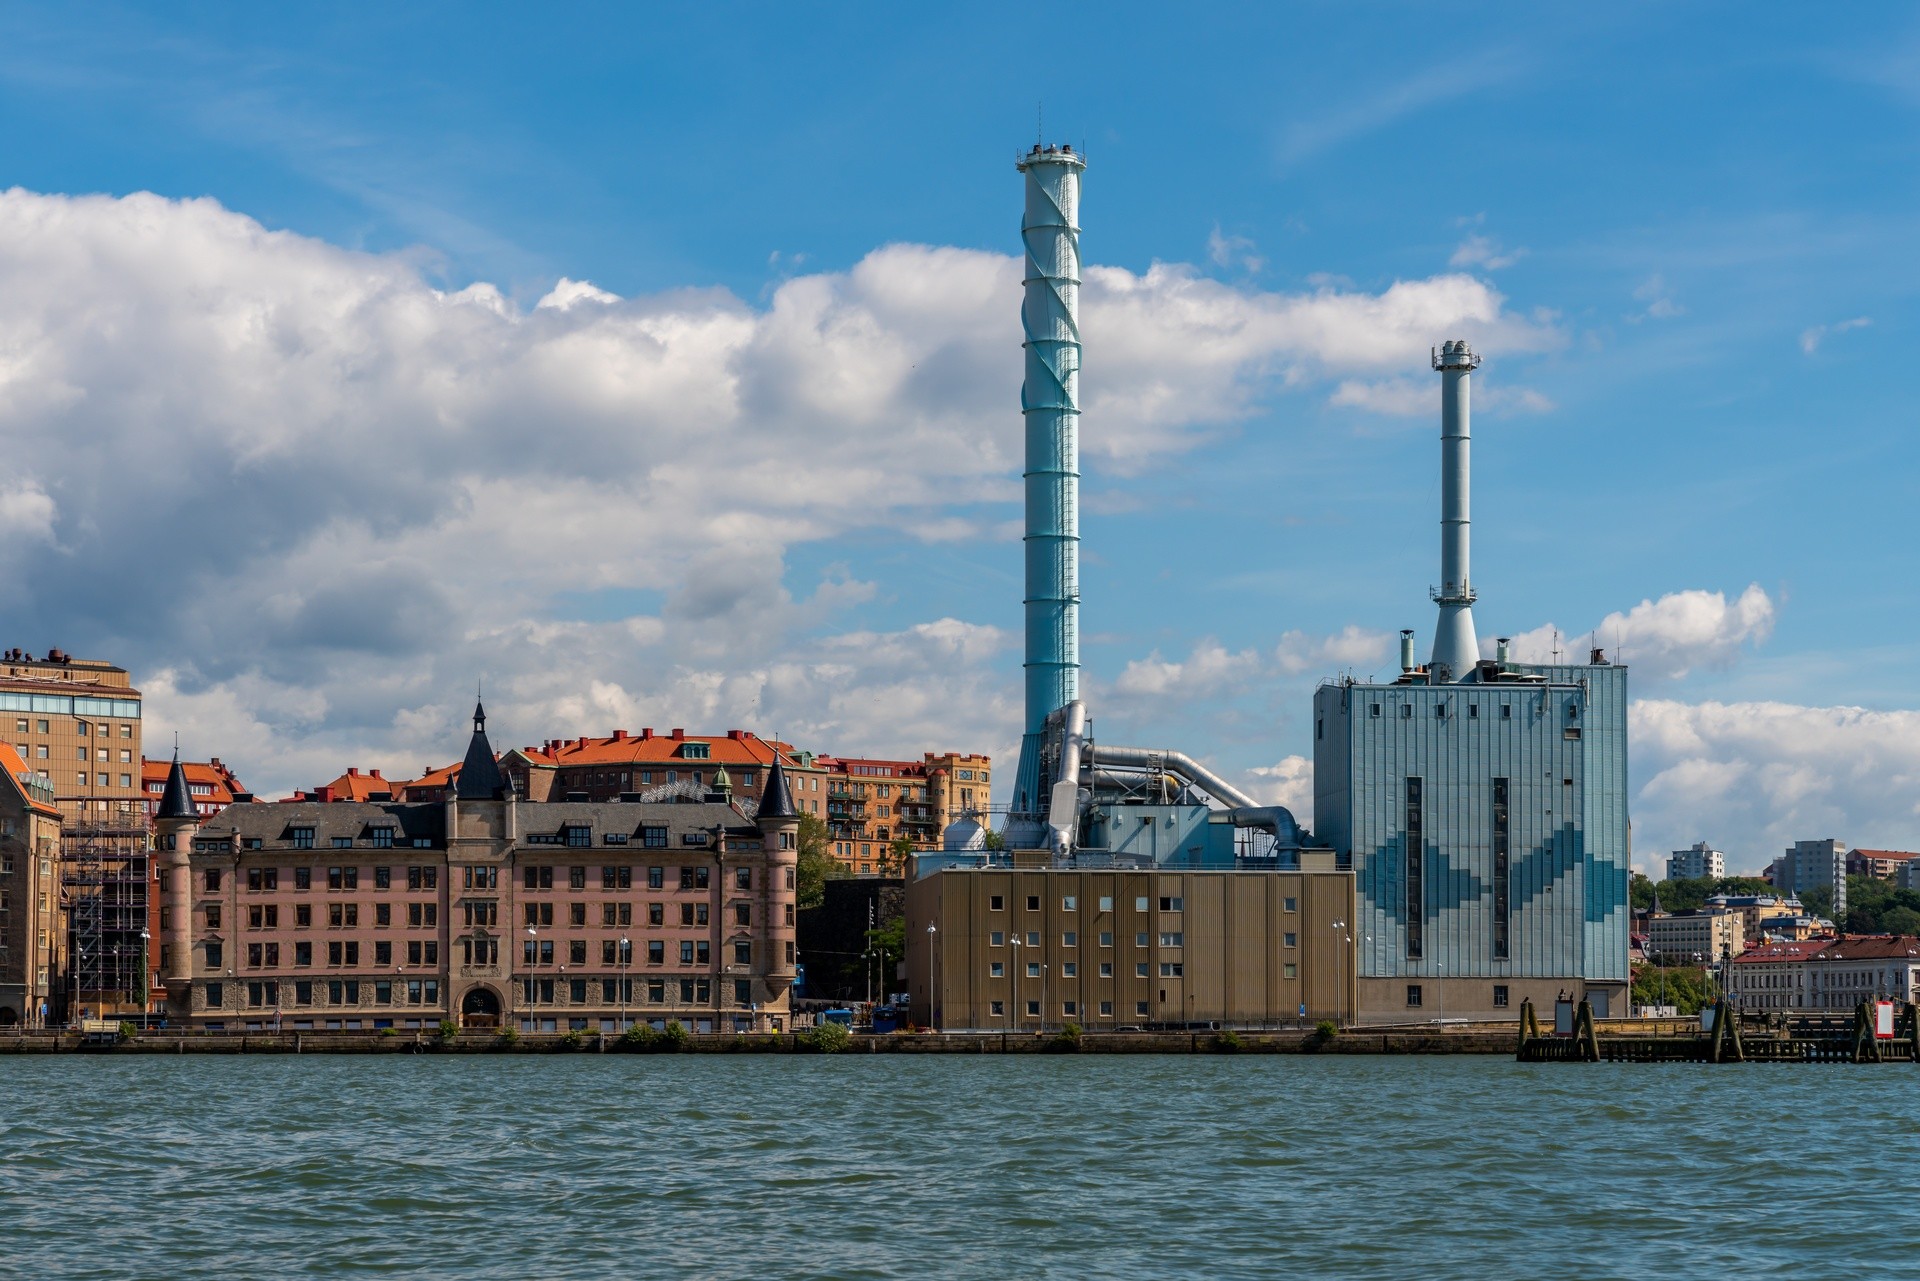 Sweden sets an example and closes its last coal plant